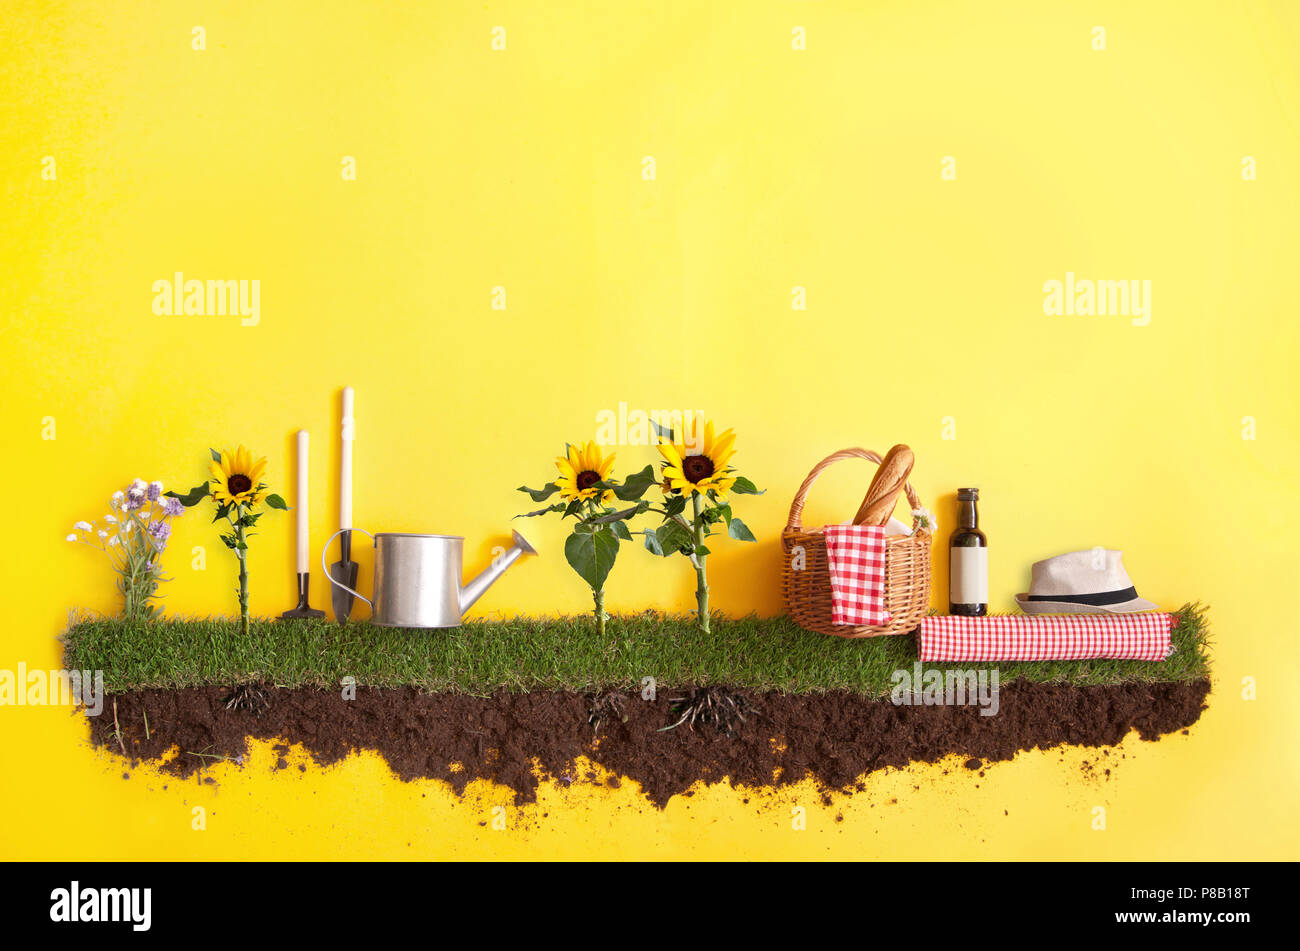 Summer picnic basket on grass patch with sunflowers Stock Photo